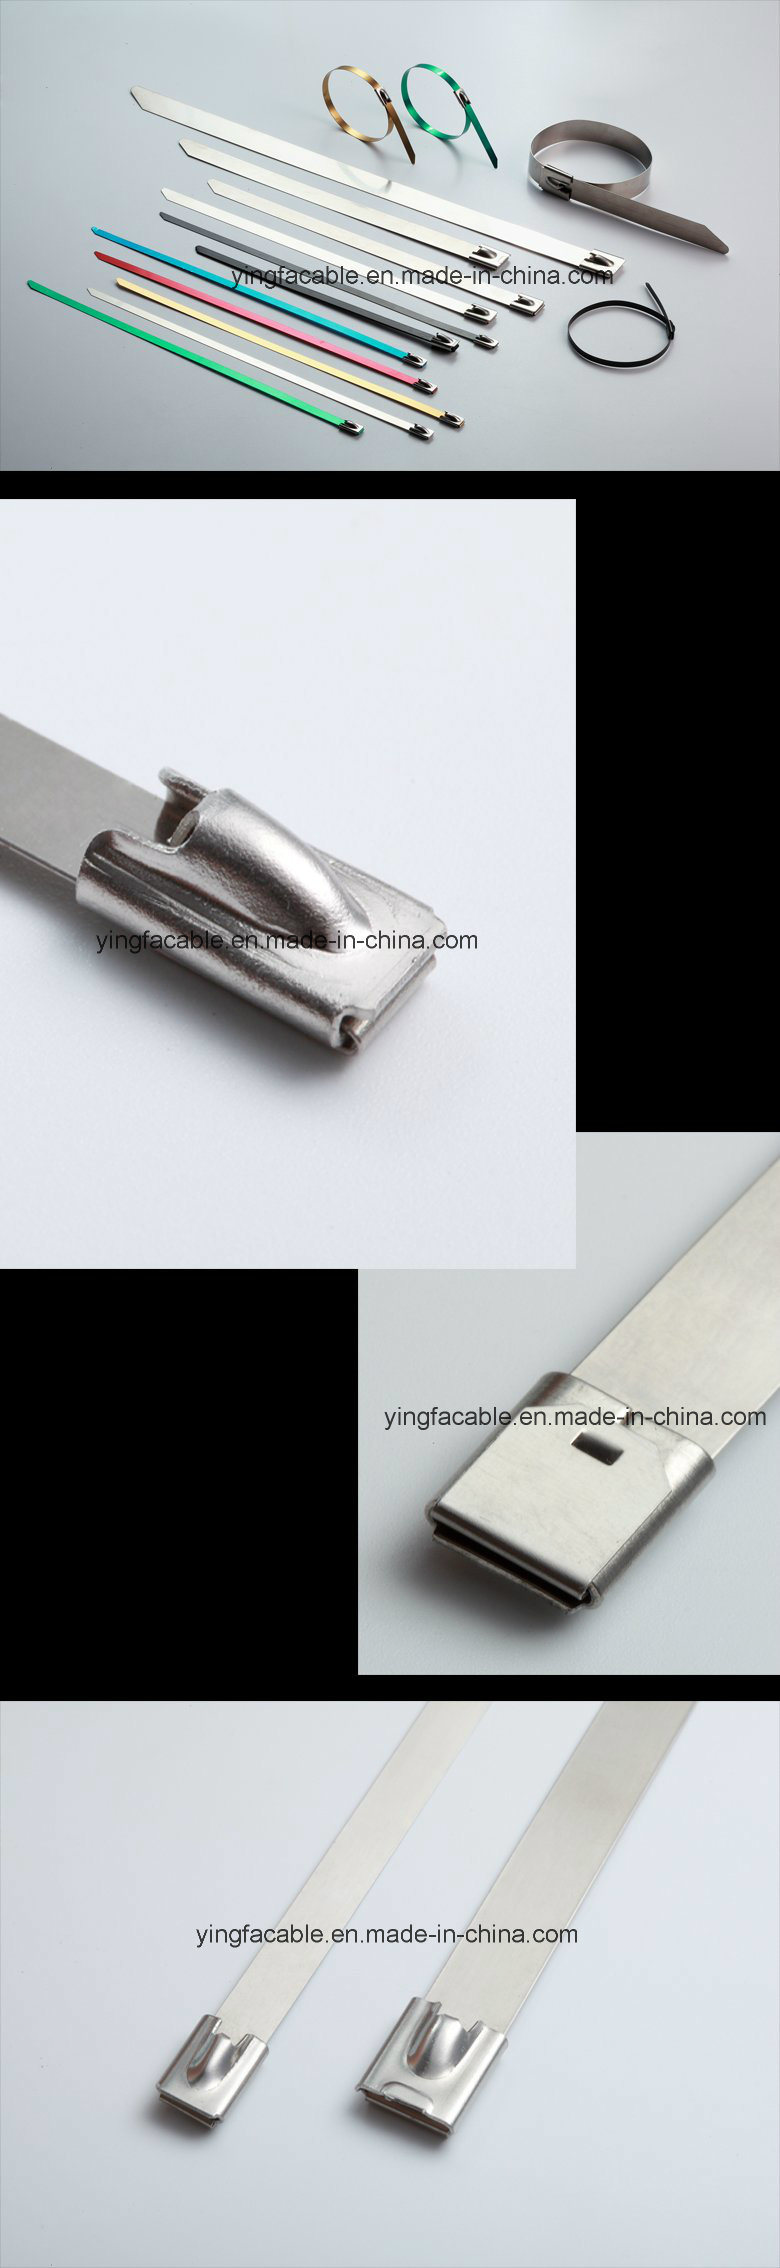 Epoxy Coated Stainless Steel Metal Locking Cable Tie with High Strength 7.9X200mm